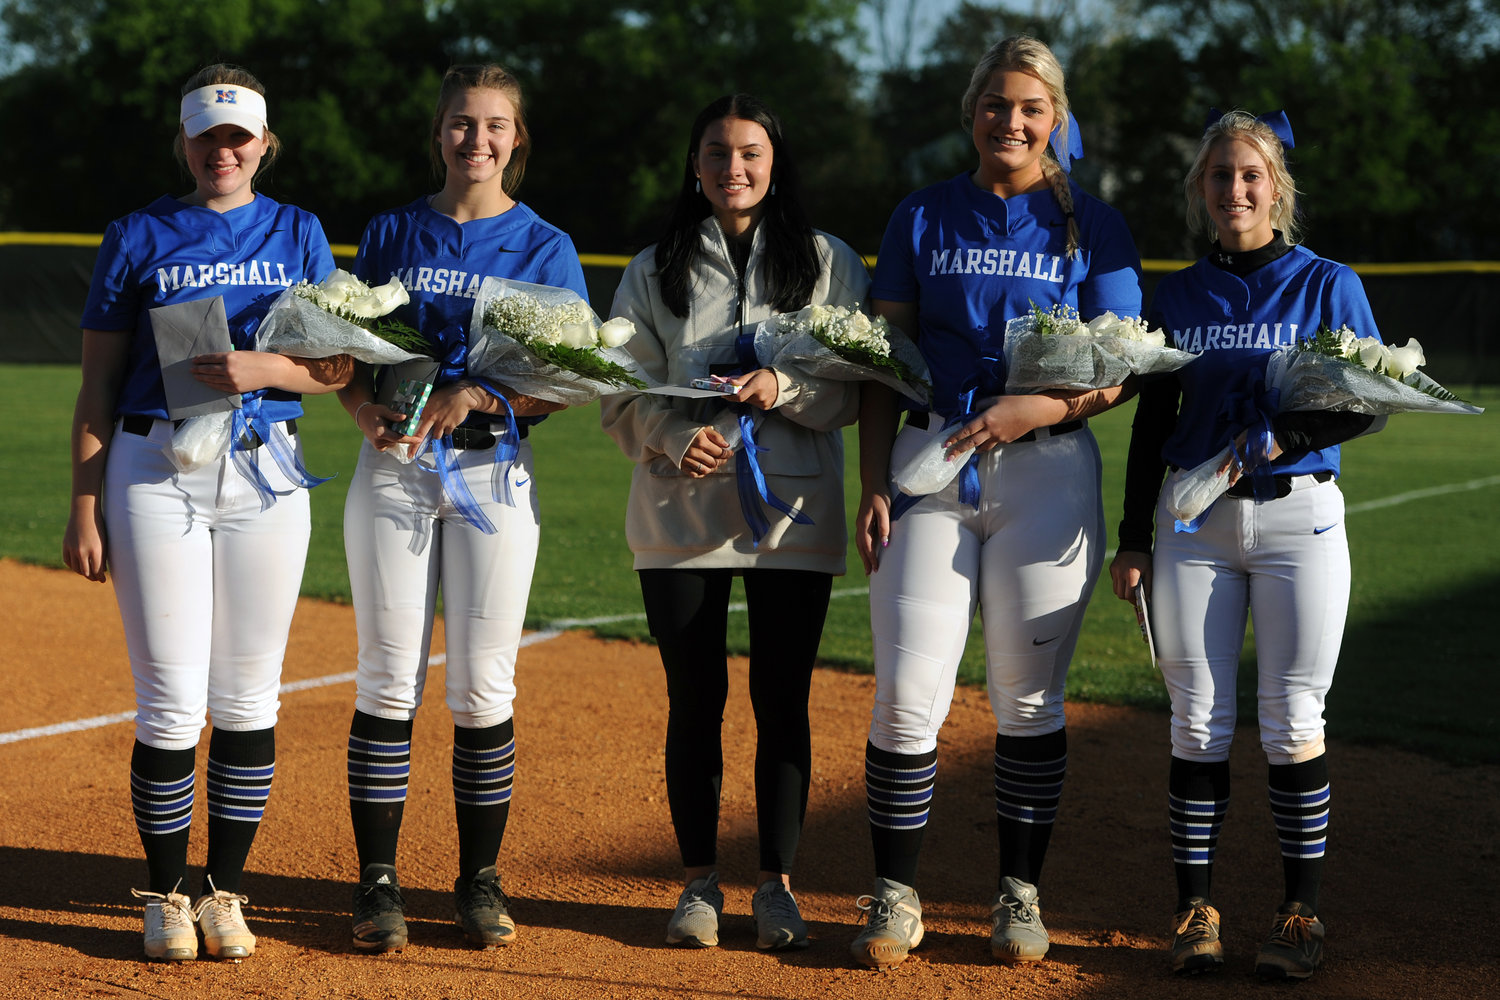 Before Tuesday night’s matchup against Spring Hill, Marshall County honored its five seniors (from left) Ellie Luce, Jessa Lancaster, Mallorie Wooten, Taylor Pickle and Olivia Wooten.